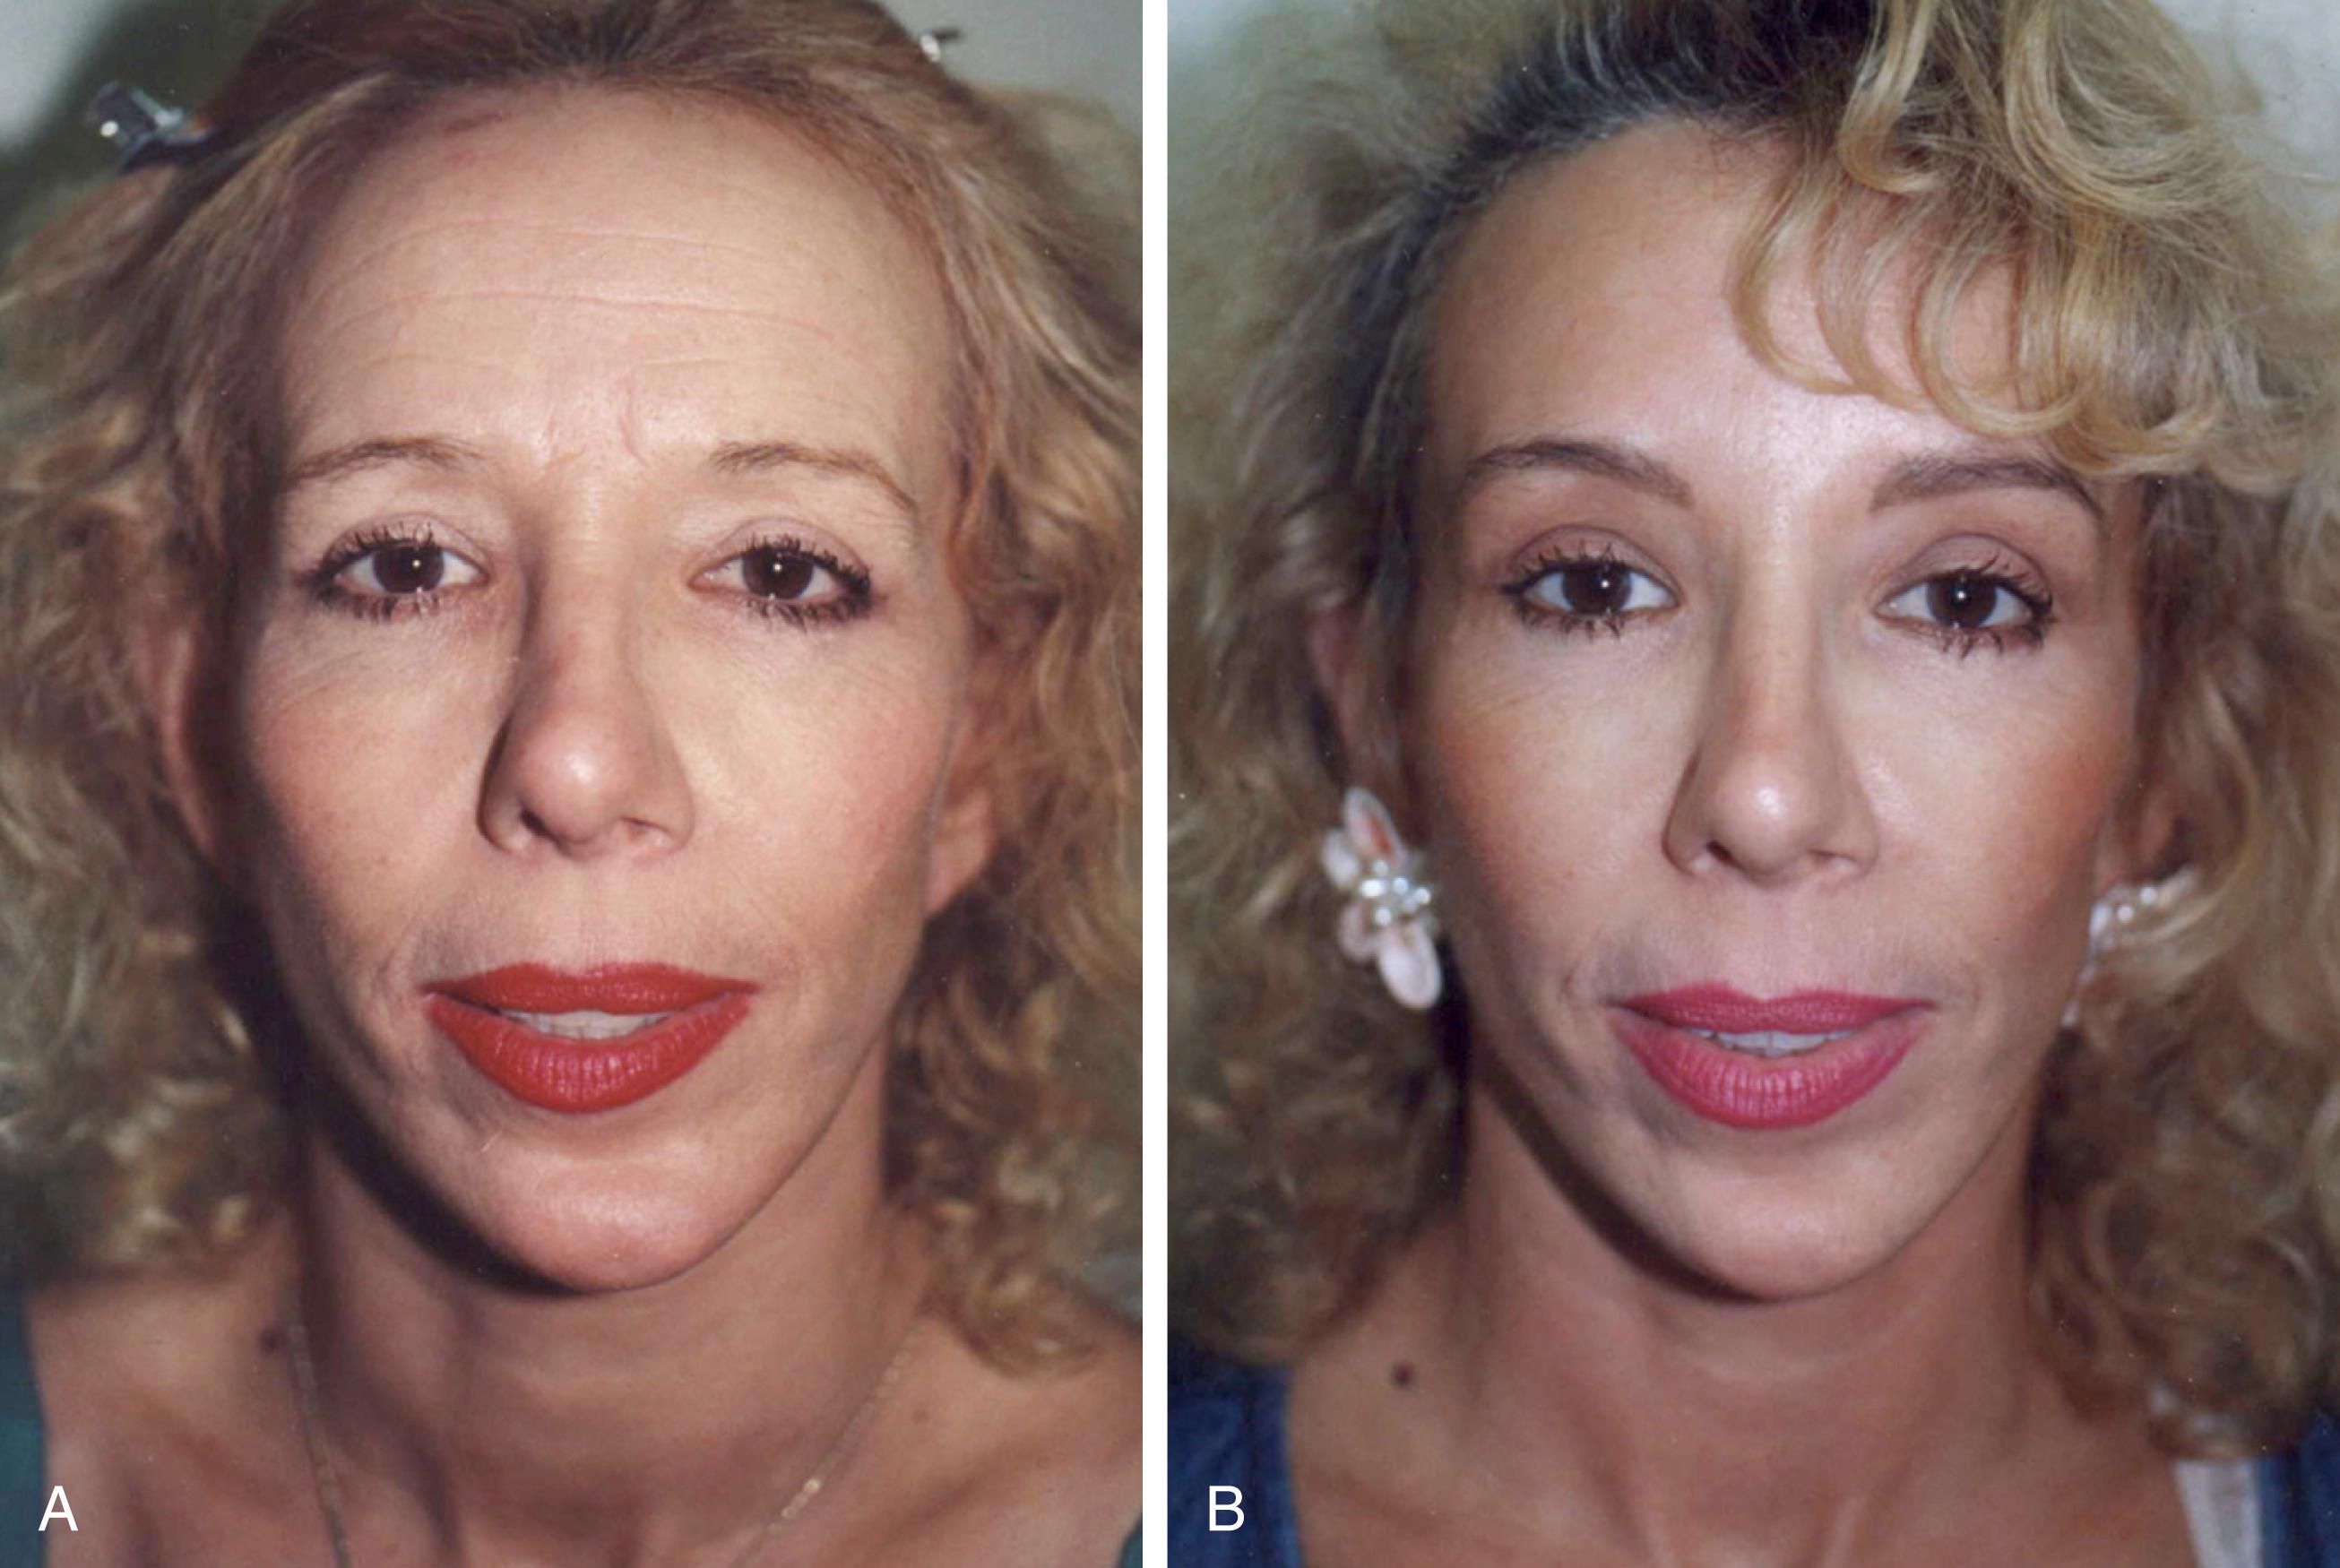 Fig. 63.1, Changes in the aging forehead . A patient seen before and after foreheadplasty. She has undergone previous facelift, upper and lower blepharoplasties, and chin implant placement performed by an unknown surgeon. A forehead lift was not performed. (A) Typical changes seen in the aging forehead include: eyebrow ptosis, lateral brow ptosis, pseudoblepharochalasis, glabellar “frown lines,” transverse forehead creases, corrugator muscle hypertrophy, transverse upper nasal creases, and hairline recession. The patient’s upper face appears older than her lower face and she has a “young face–old forehead” appearance. (B) The same patient after foreheadplasty. No eyelid or other surgery has been performed. The patient’s eyebrows can be seen to have better position and configuration and the brow shape imparts a more alert, attractive, and feminine appearance. While preoperatively it might appear that excess skin is present on her upper eyelids repositioning her brows has revealed that this was pseudoblepharochalasis and that her upper lids are actually short on skin. Glabellar frown lines and transverse forehead crease have been effectively treated creating a less tense and more agreeable appearance. The frontal hairline has been lowered to a more youthful and esthetic position, creating better balance with other facial features.